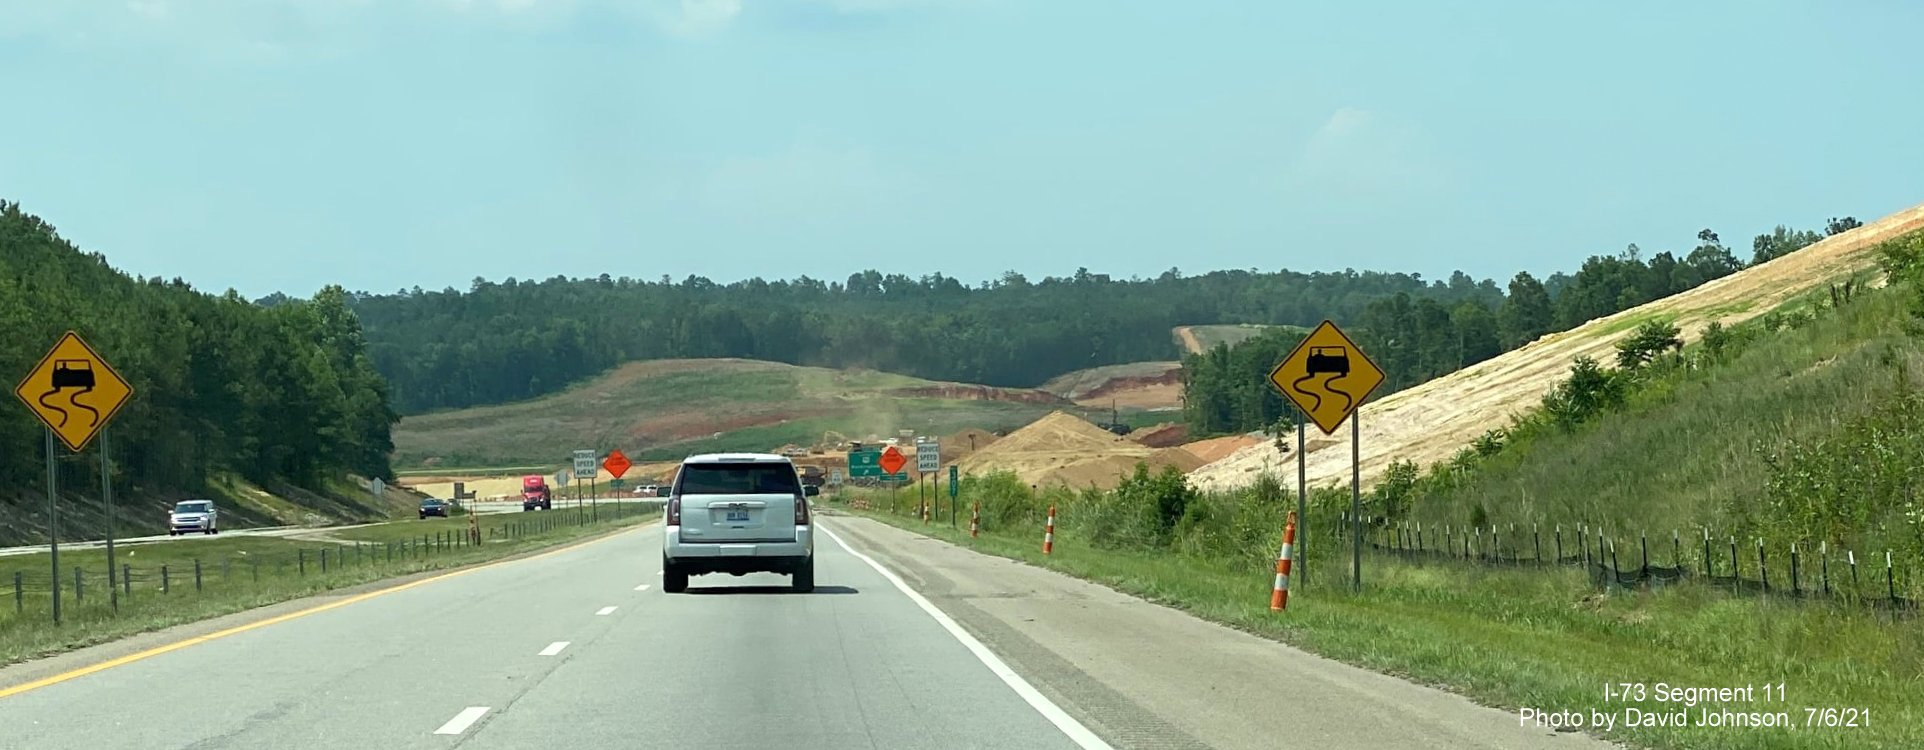 Image of construction zone for future interchange with I-73/I-74 Rockingham Bypass as seen from 
        US 74 West, by David Johnson, July 2021